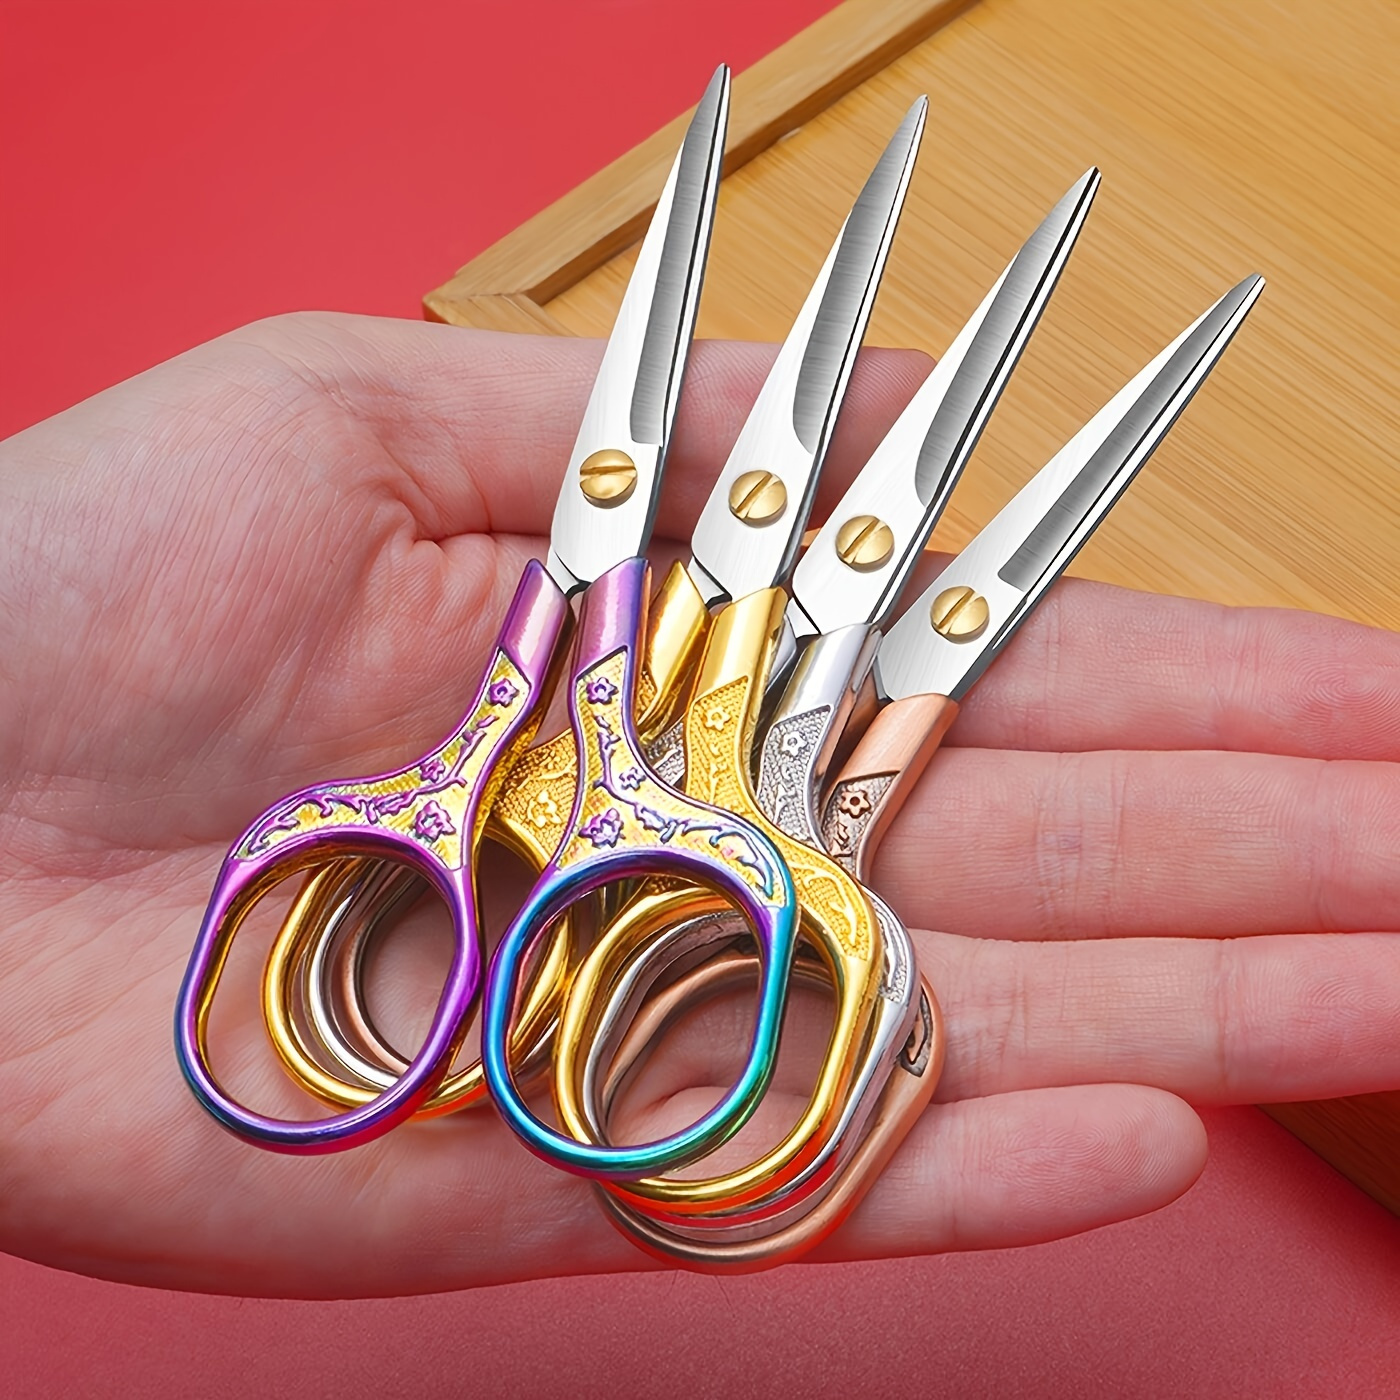 1pc Stainless Steel Zinc Alloy Cross Stitch Scissors With Pointed Edge For  Tea Leaf Cutting, Cross Stitching, Thread Cutting, Floral Arrangement And  Paper Cutting, Vintage Style